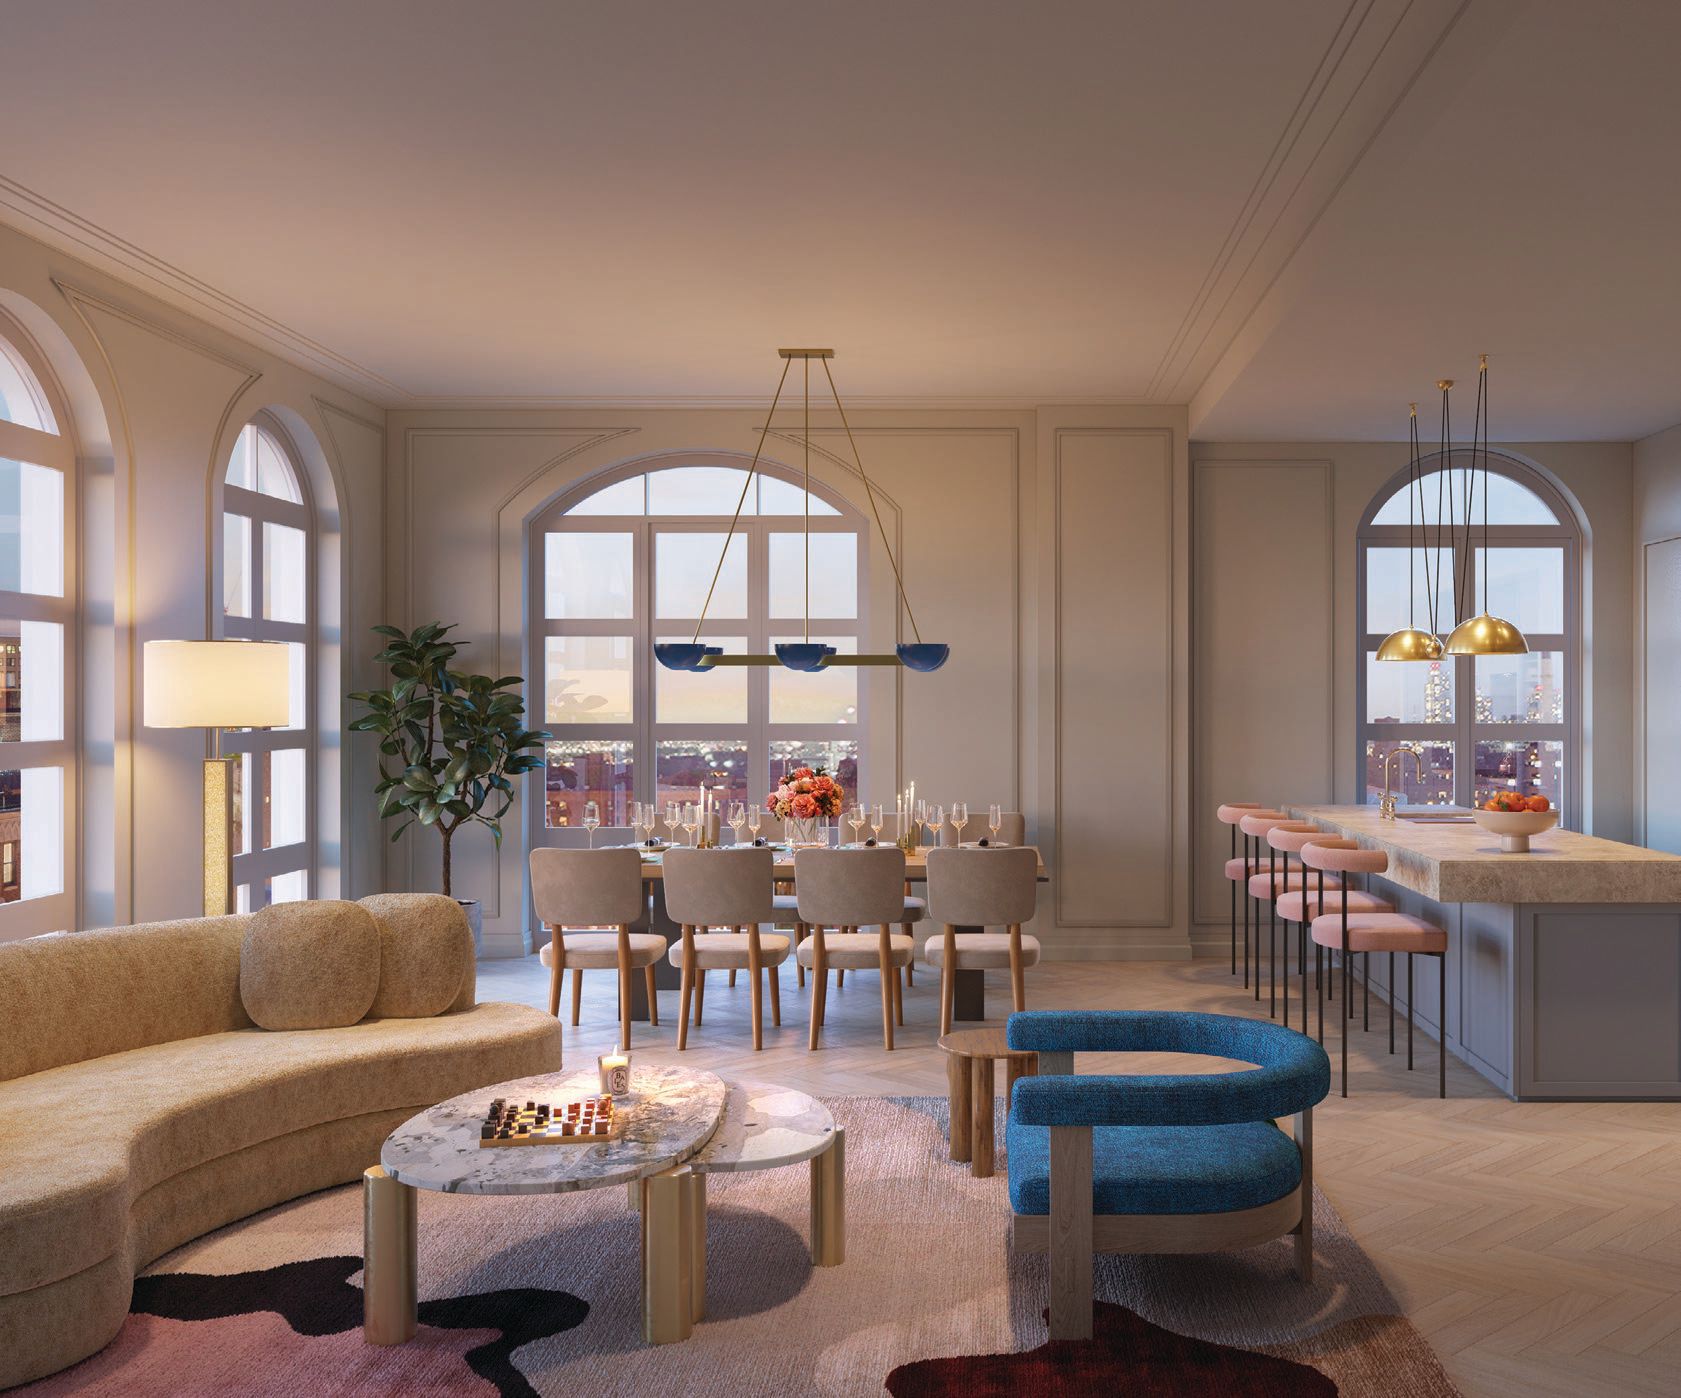 Penthouse residences offer plenty of space to live lavishly. RENDERING BY WILLIAMS NEW YORK